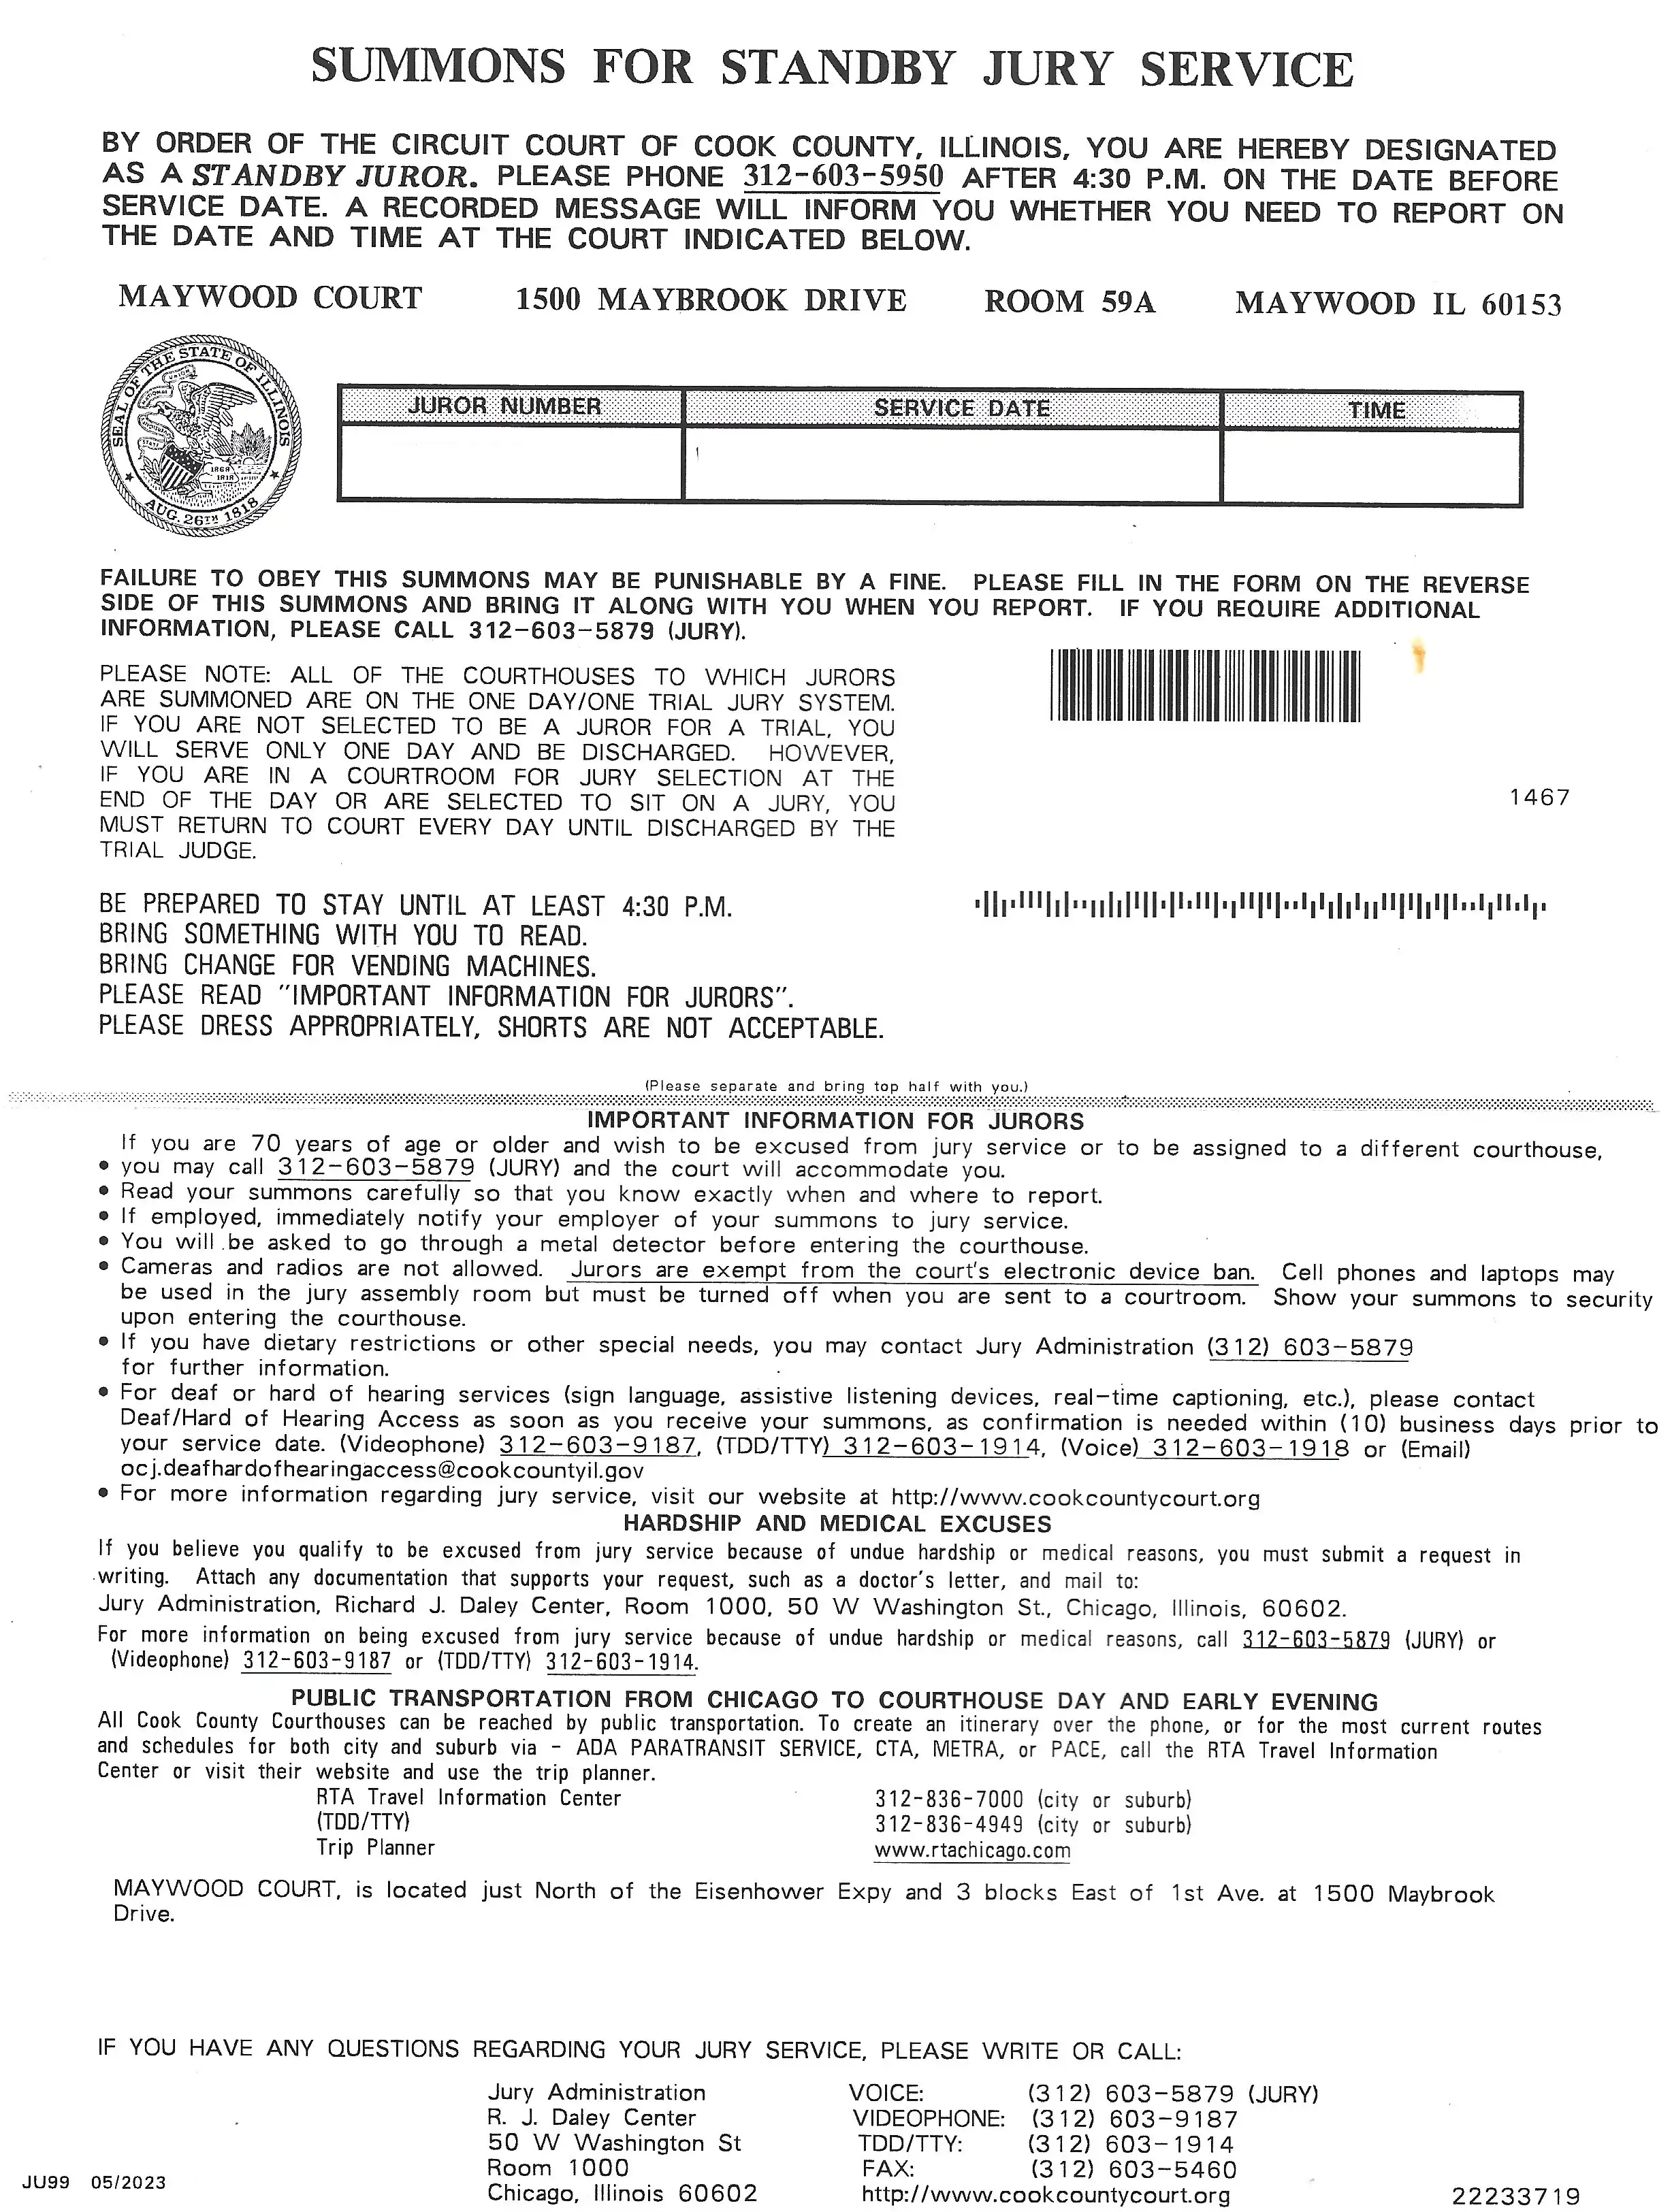 Summons For Standby Jury Service Letter - Cook County Illinois